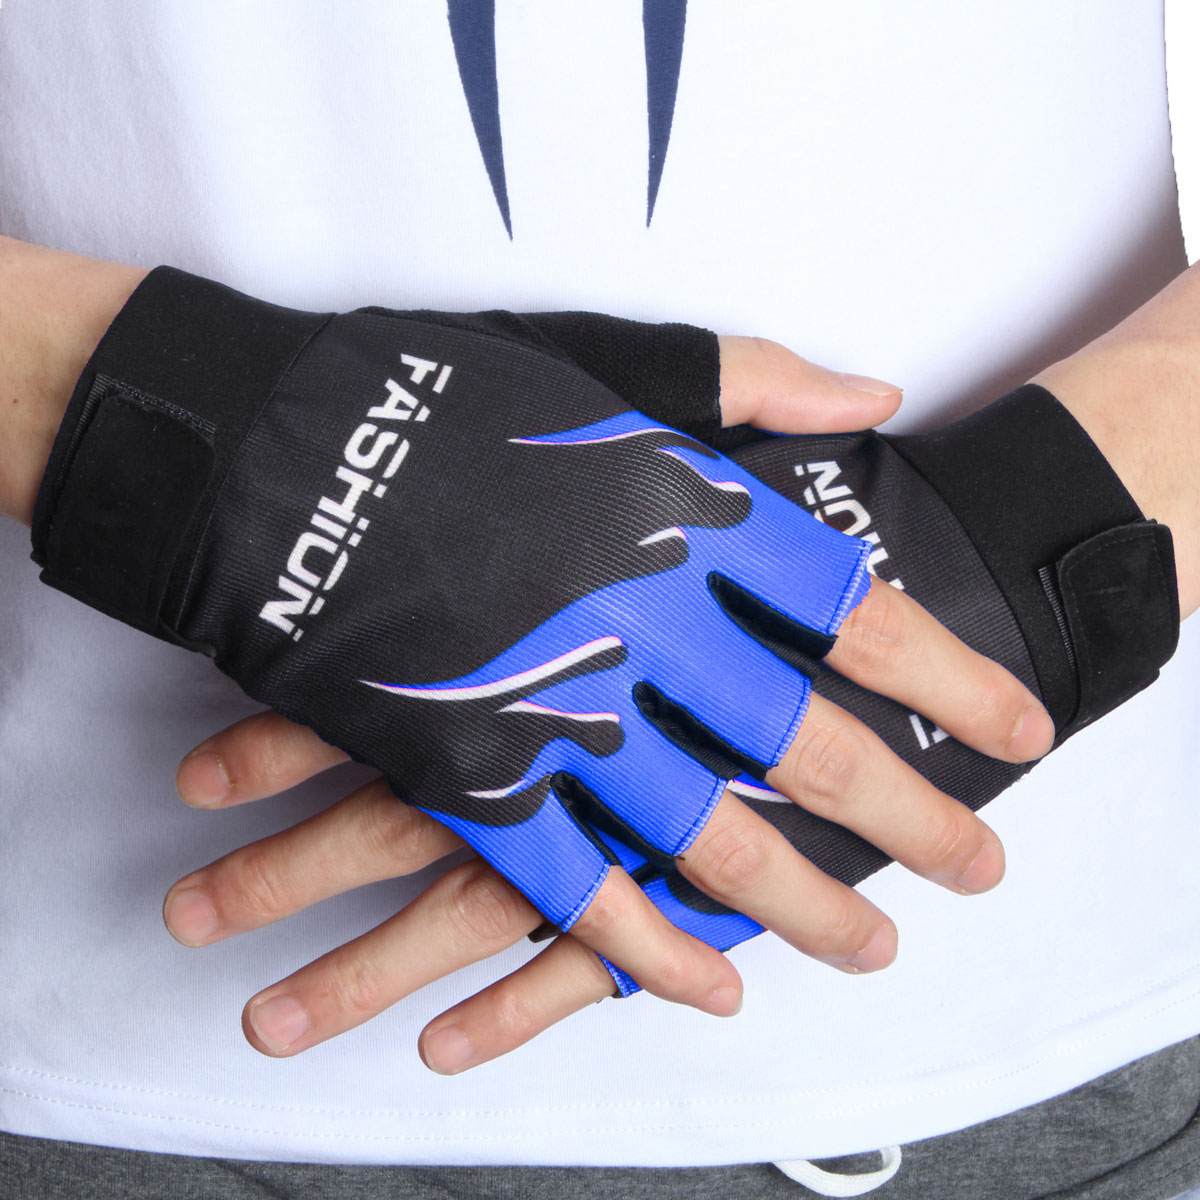 Motorcycle-Cycling-Half-Finger-Gloves-Sport-Mountain-Bike-Antiskid-4-Colors-1057624